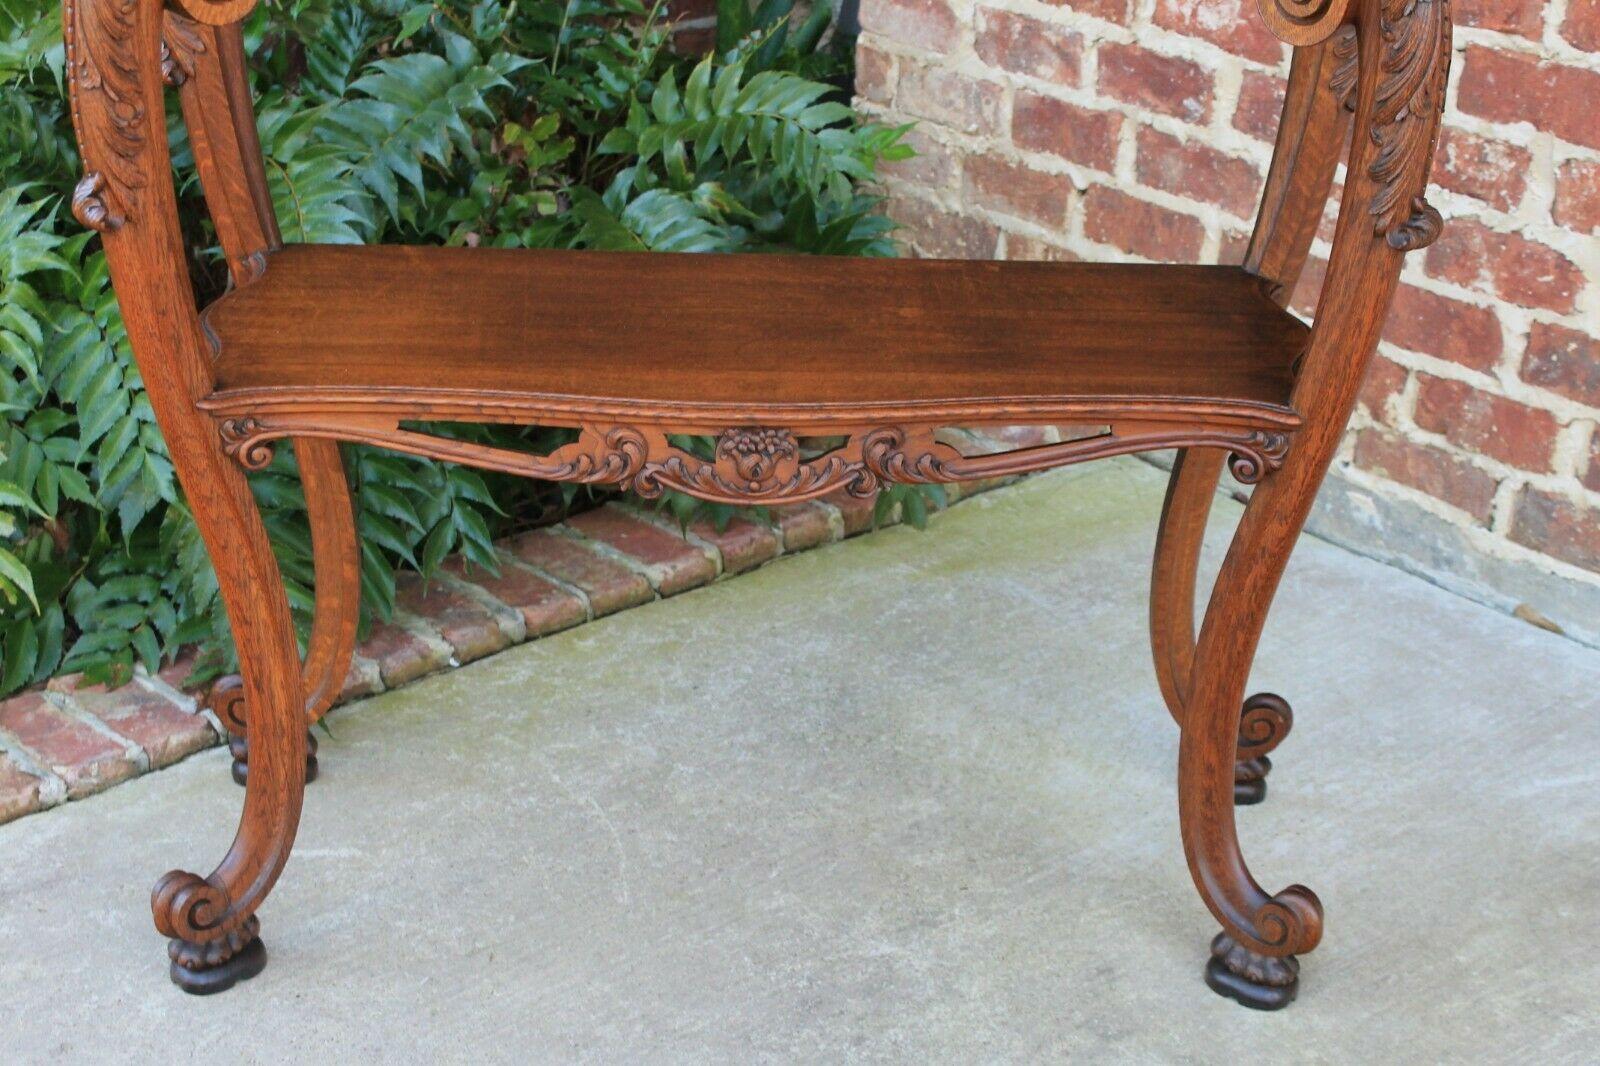 Late 19th Century Antique French Server Dessert Table 2-Tier Sideboard Console Sofa Table Oak